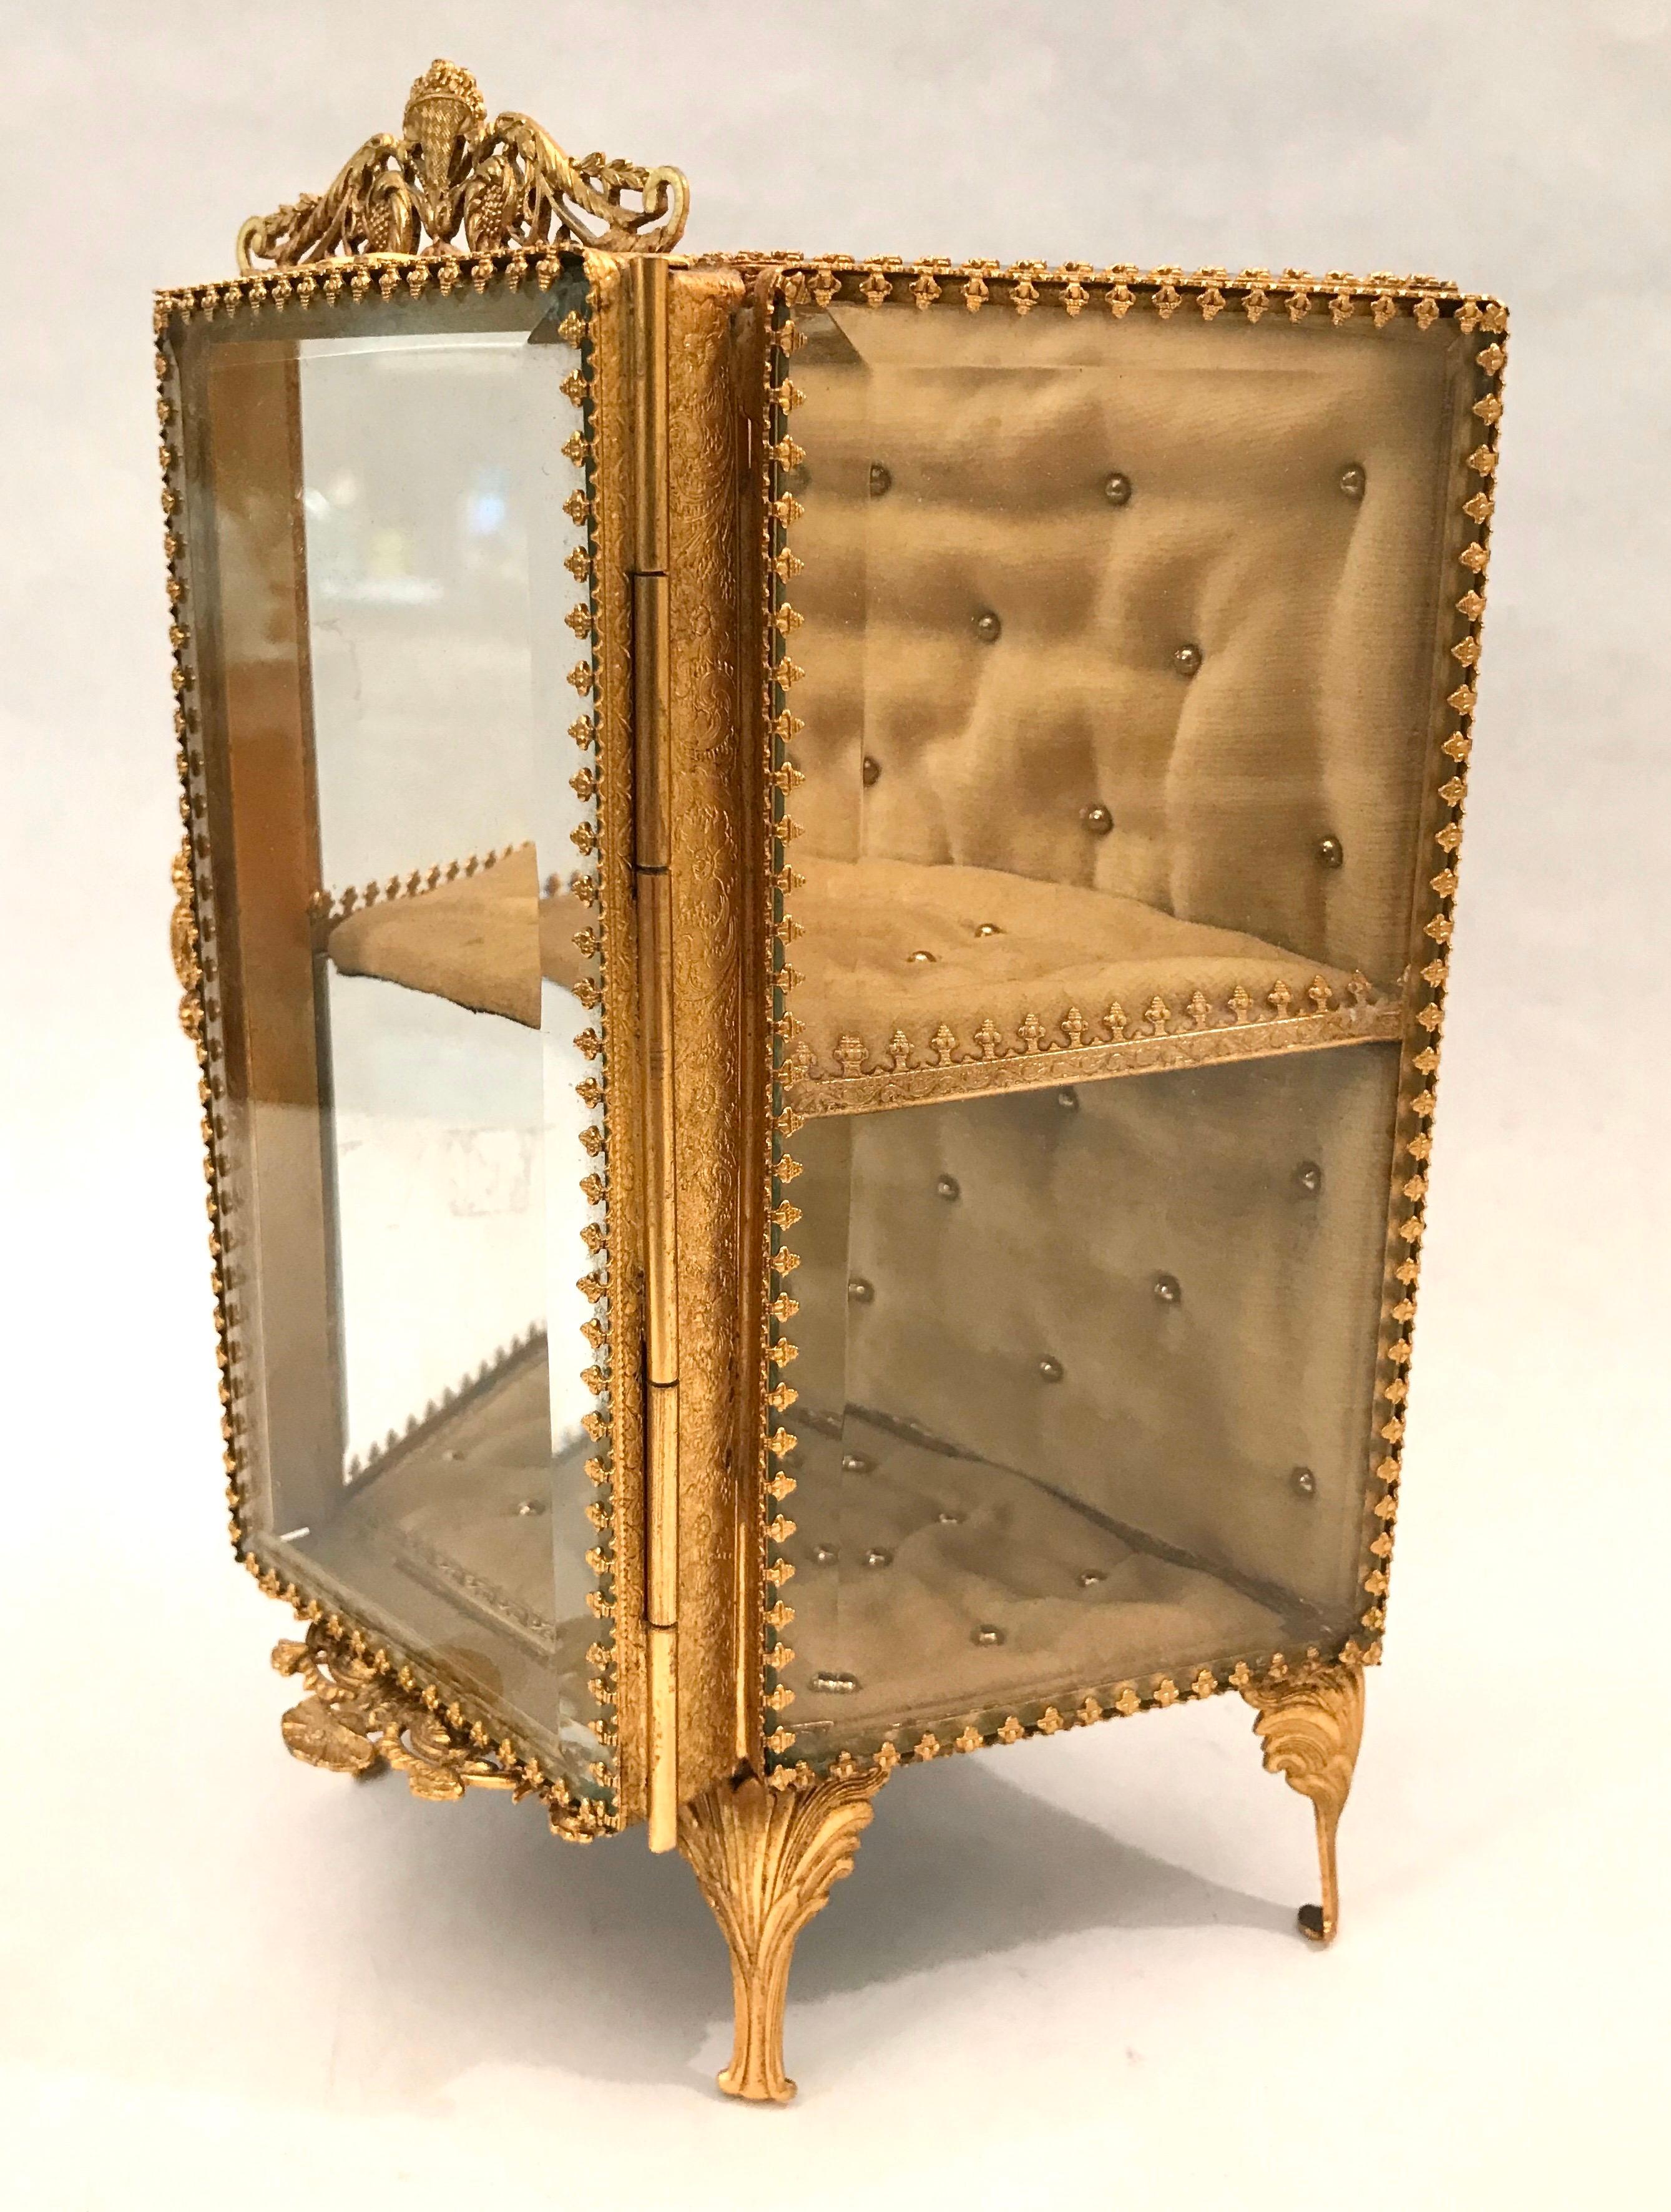 French Gilt Ormolu Miniature Vitrine Jewelry Box Display In Good Condition For Sale In Lake Success, NY